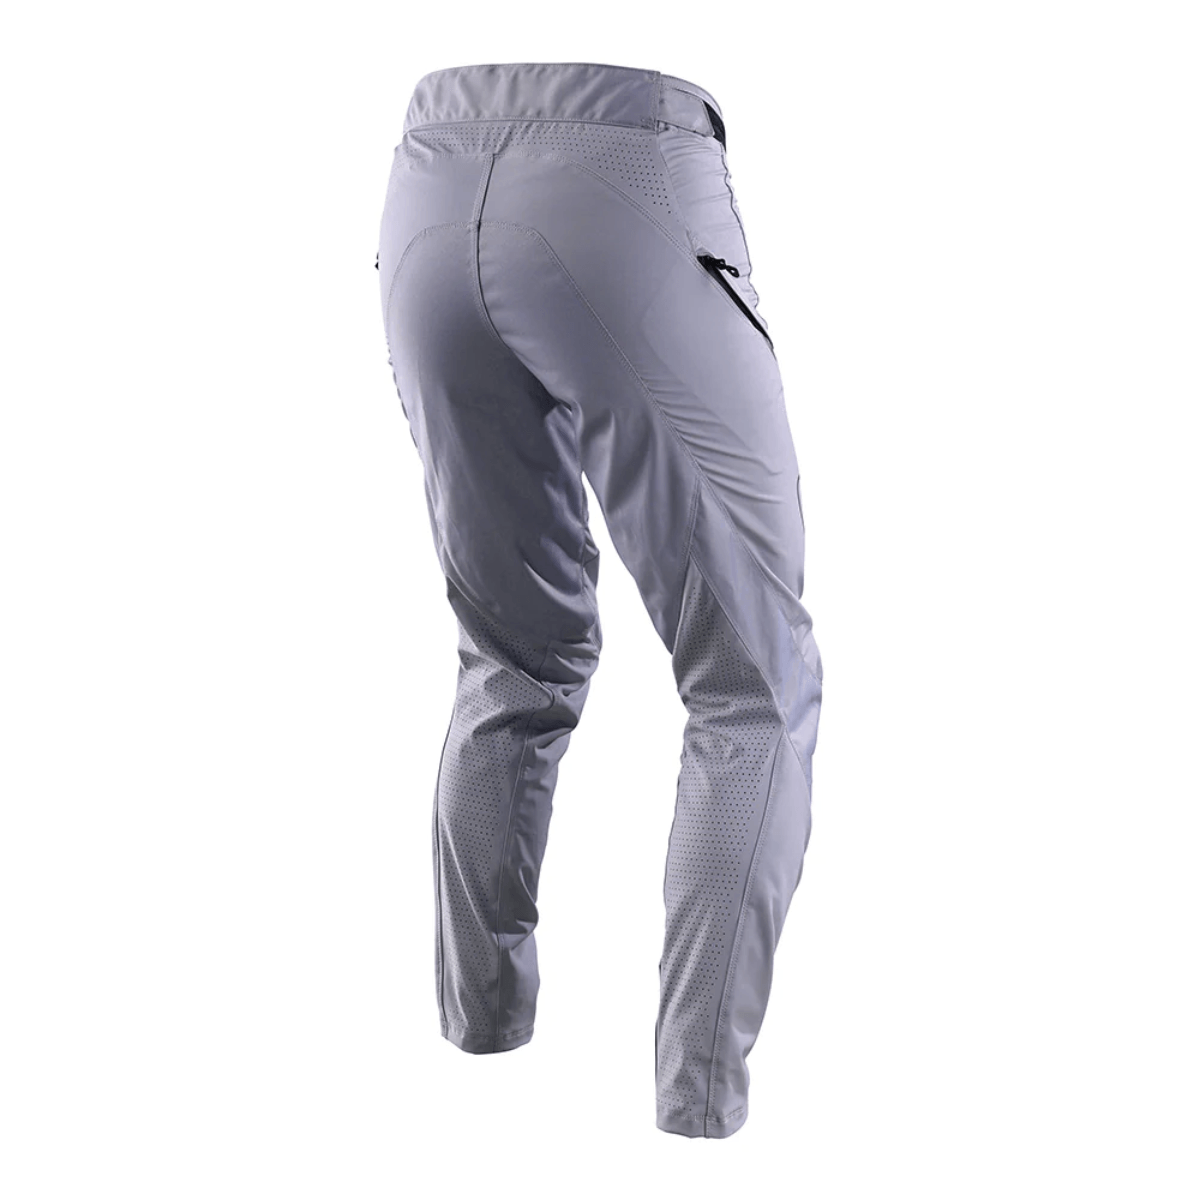 Troy Lee Designs Sprint Mono 23 Pants Grey TLD-22993101 Cycling Clothing